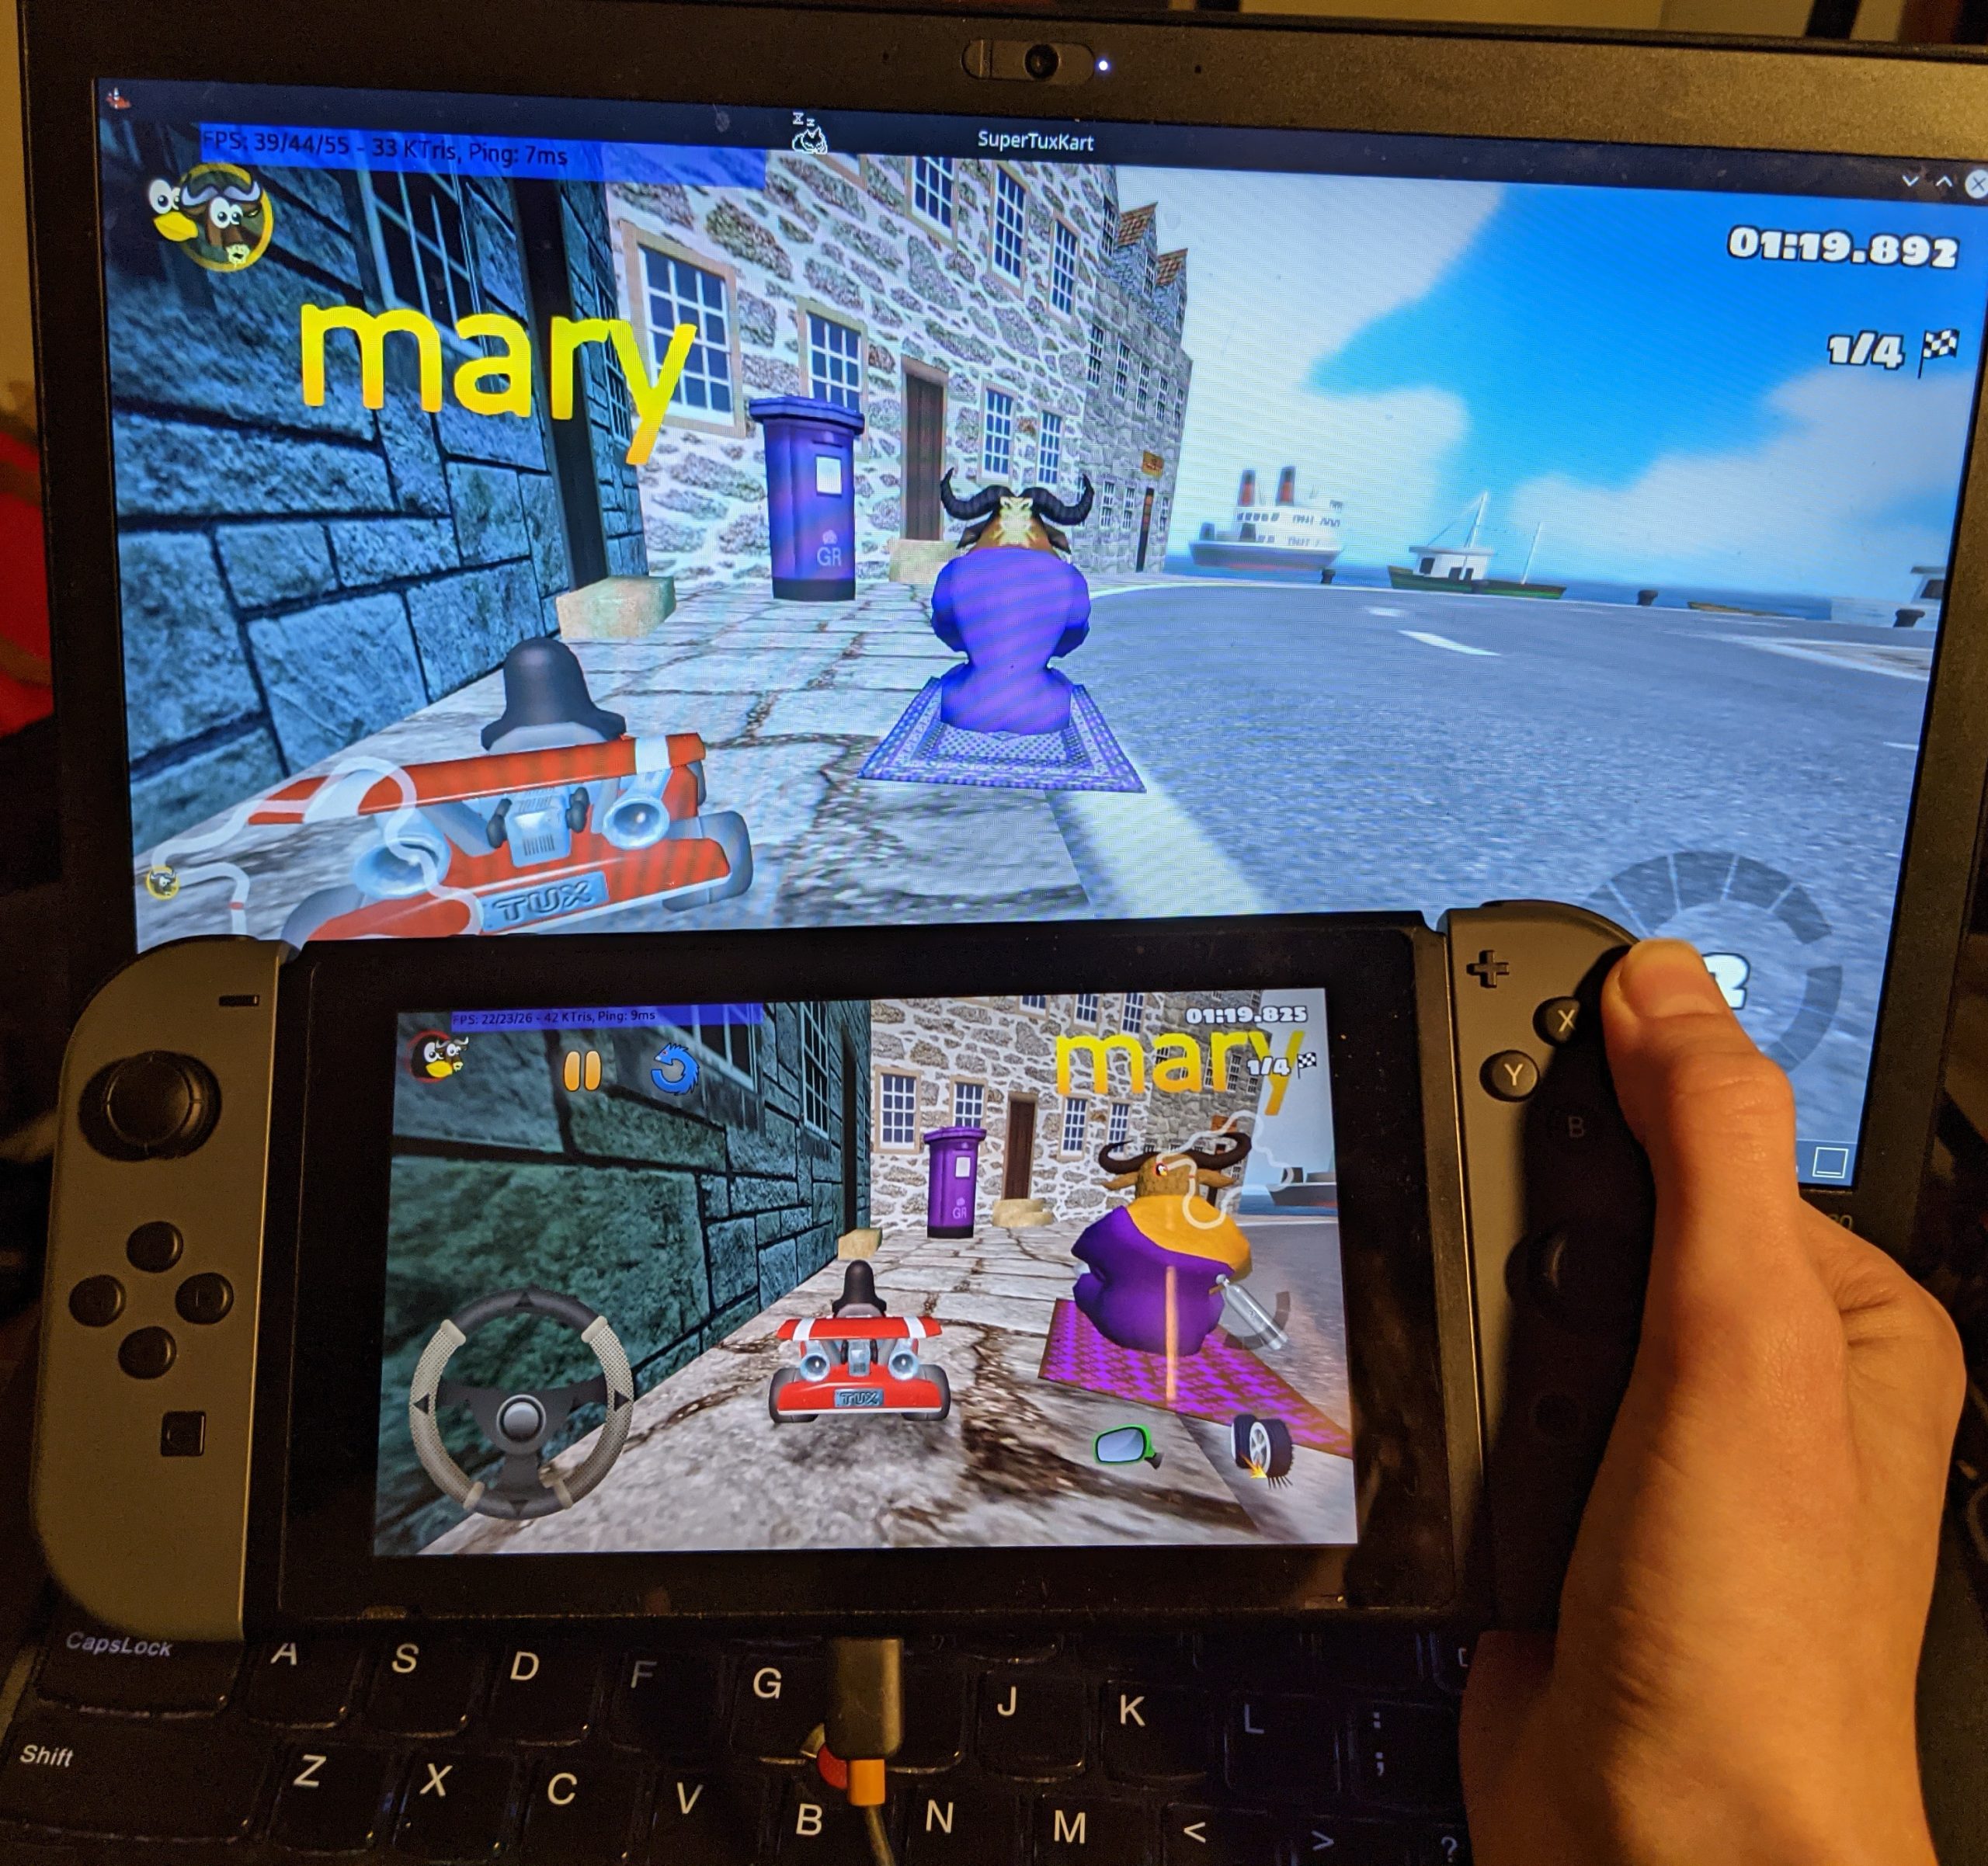 SuperTuxKart being played on the Switch